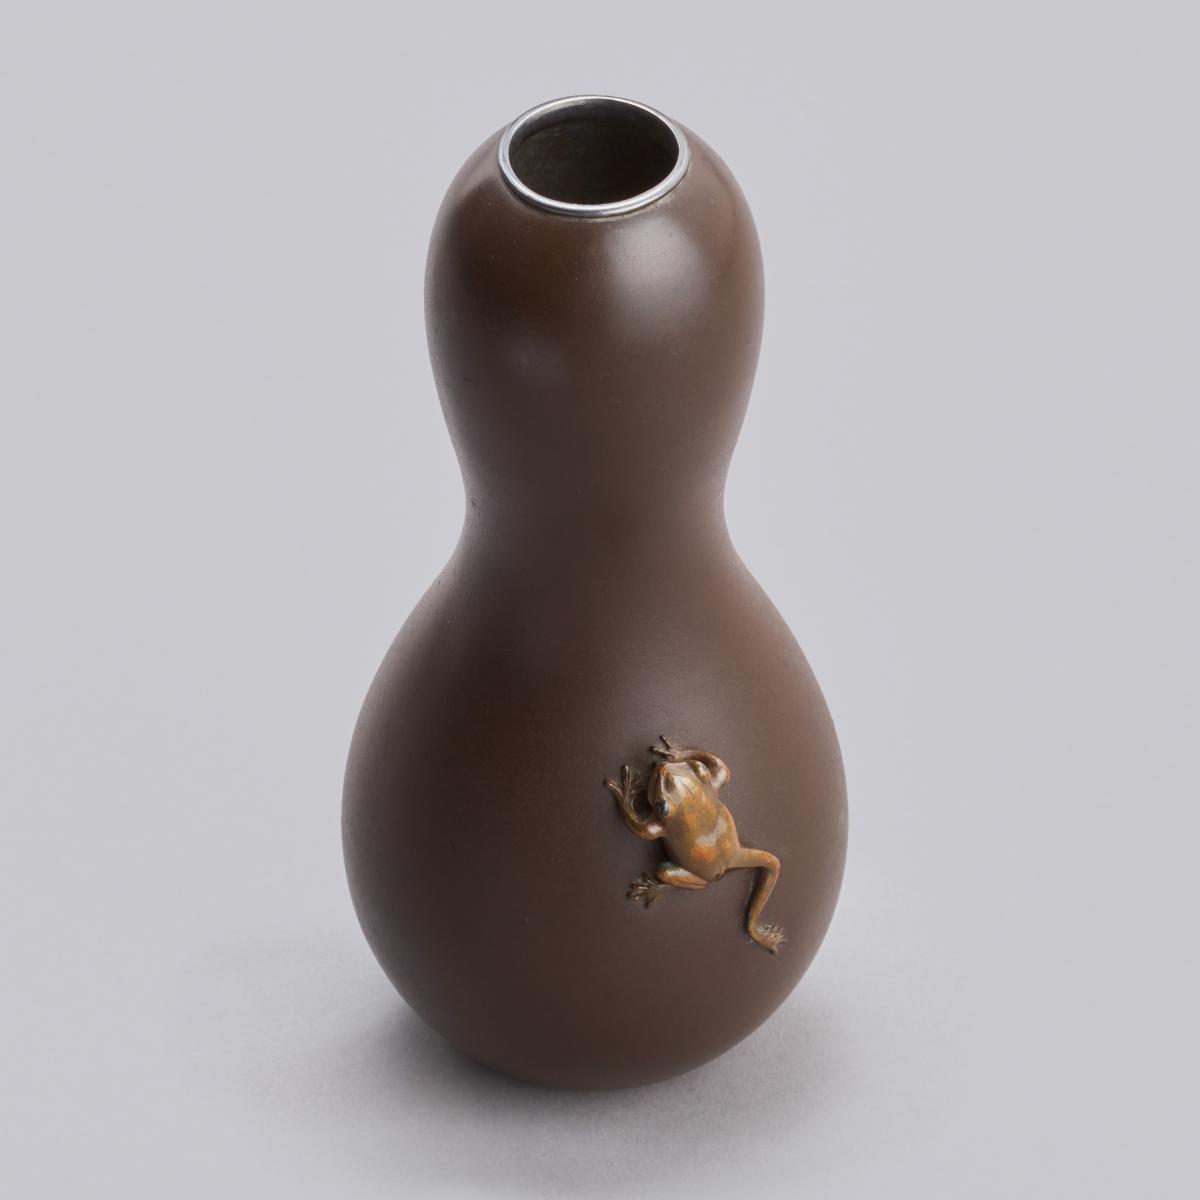 Japanese bronze vase of gourd shape with a climbing frog, signed with incised characters Yoshimitsu zo 